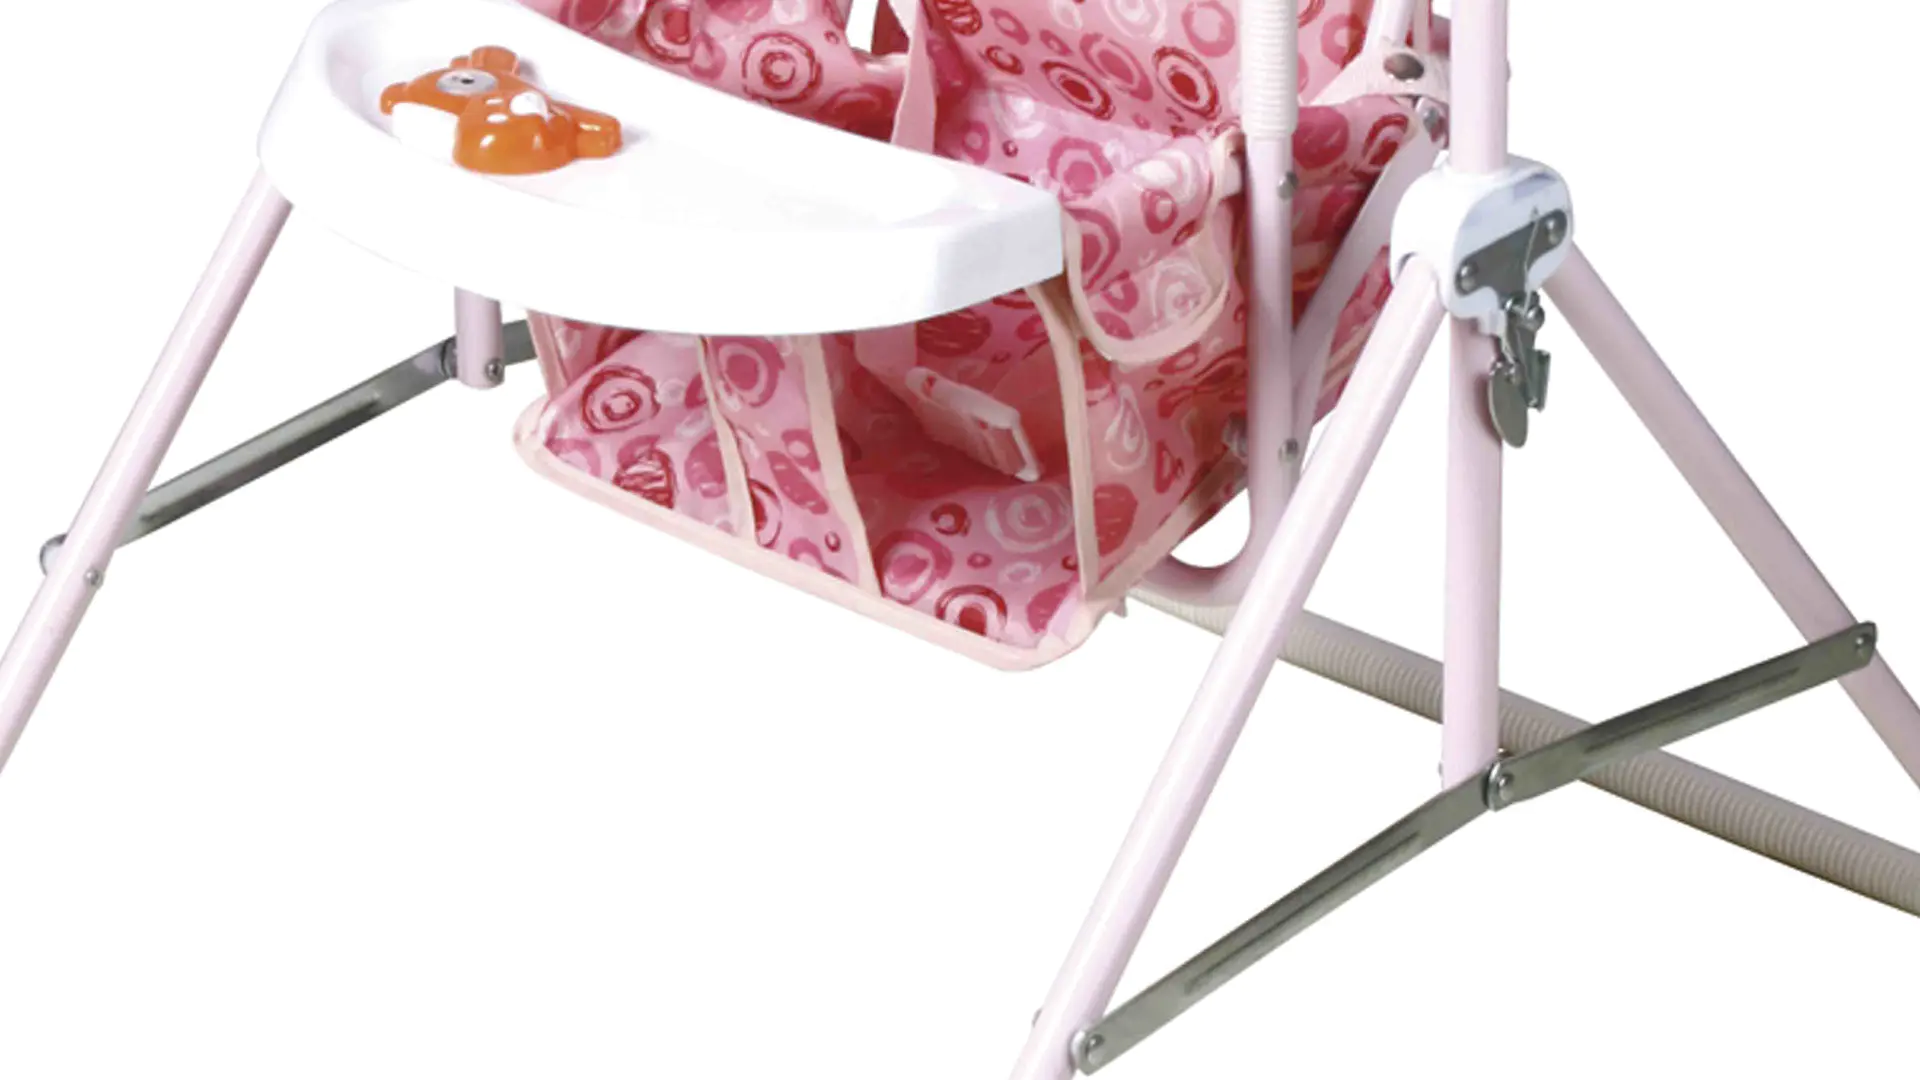 Wholesale foldable baby swing chair online Aoqi Brand